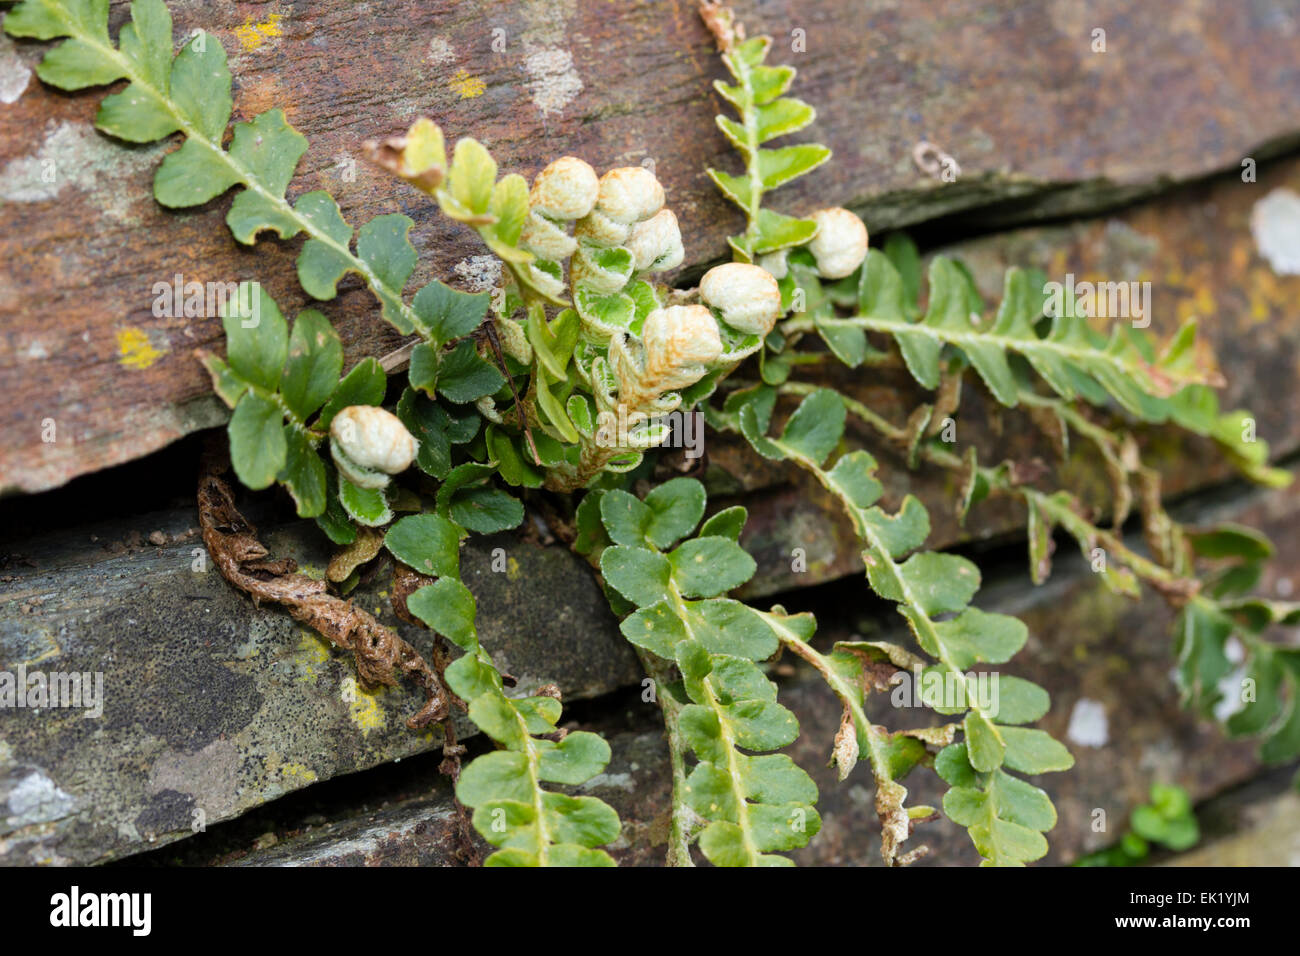 Emerging spring fronds of the rustyback fern, Ceterach officinarum, in the crevice of a stone wall Stock Photo